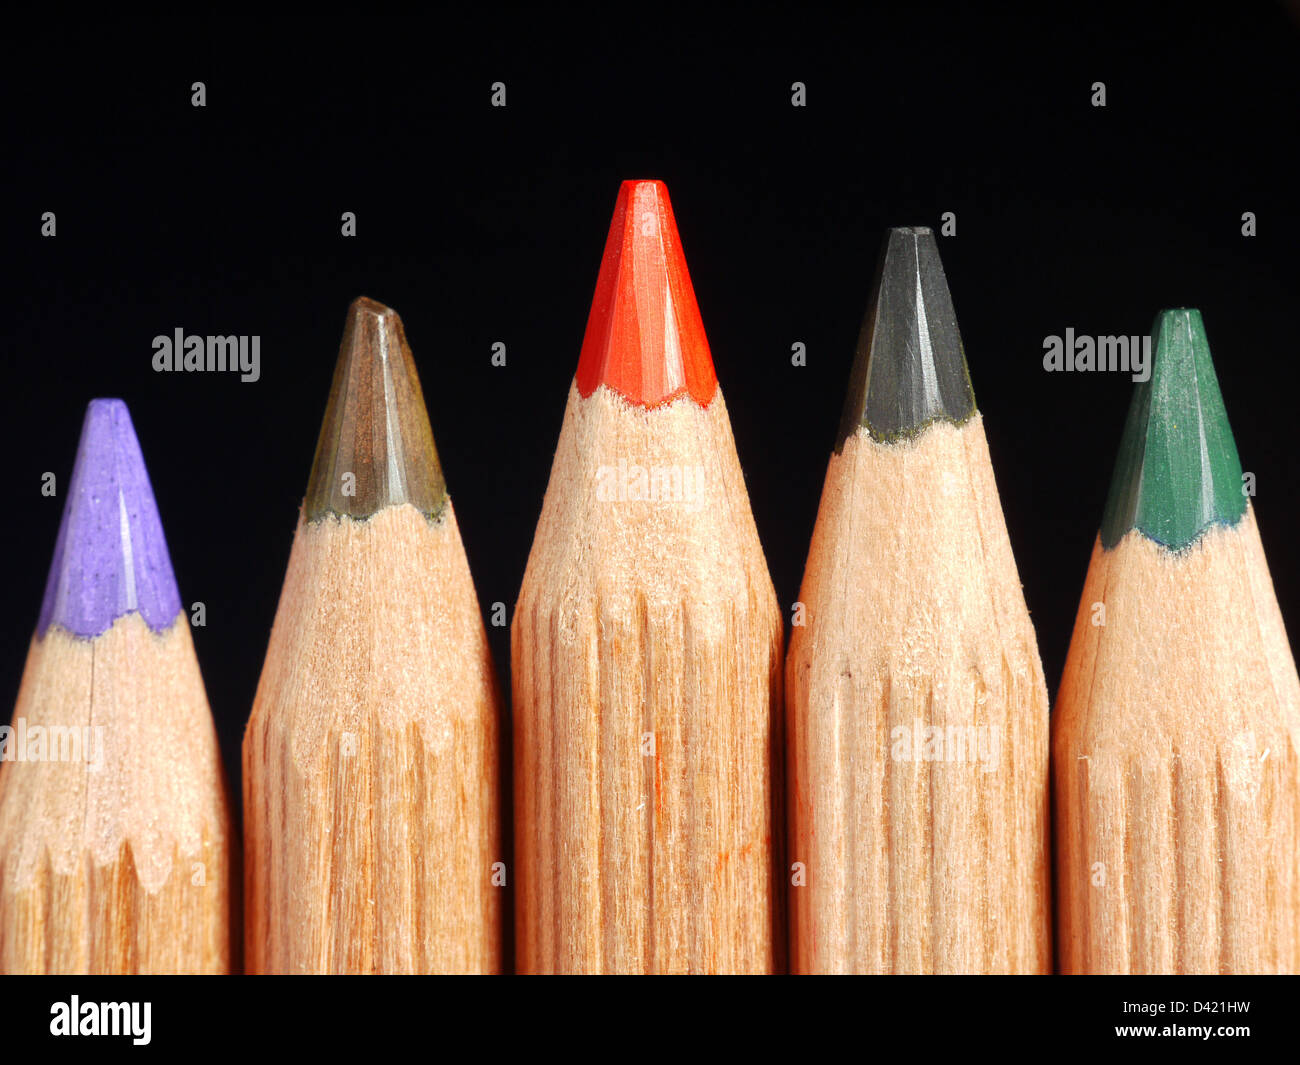 Closeup of row of colorful wooden crayons shot over black background Stock Photo